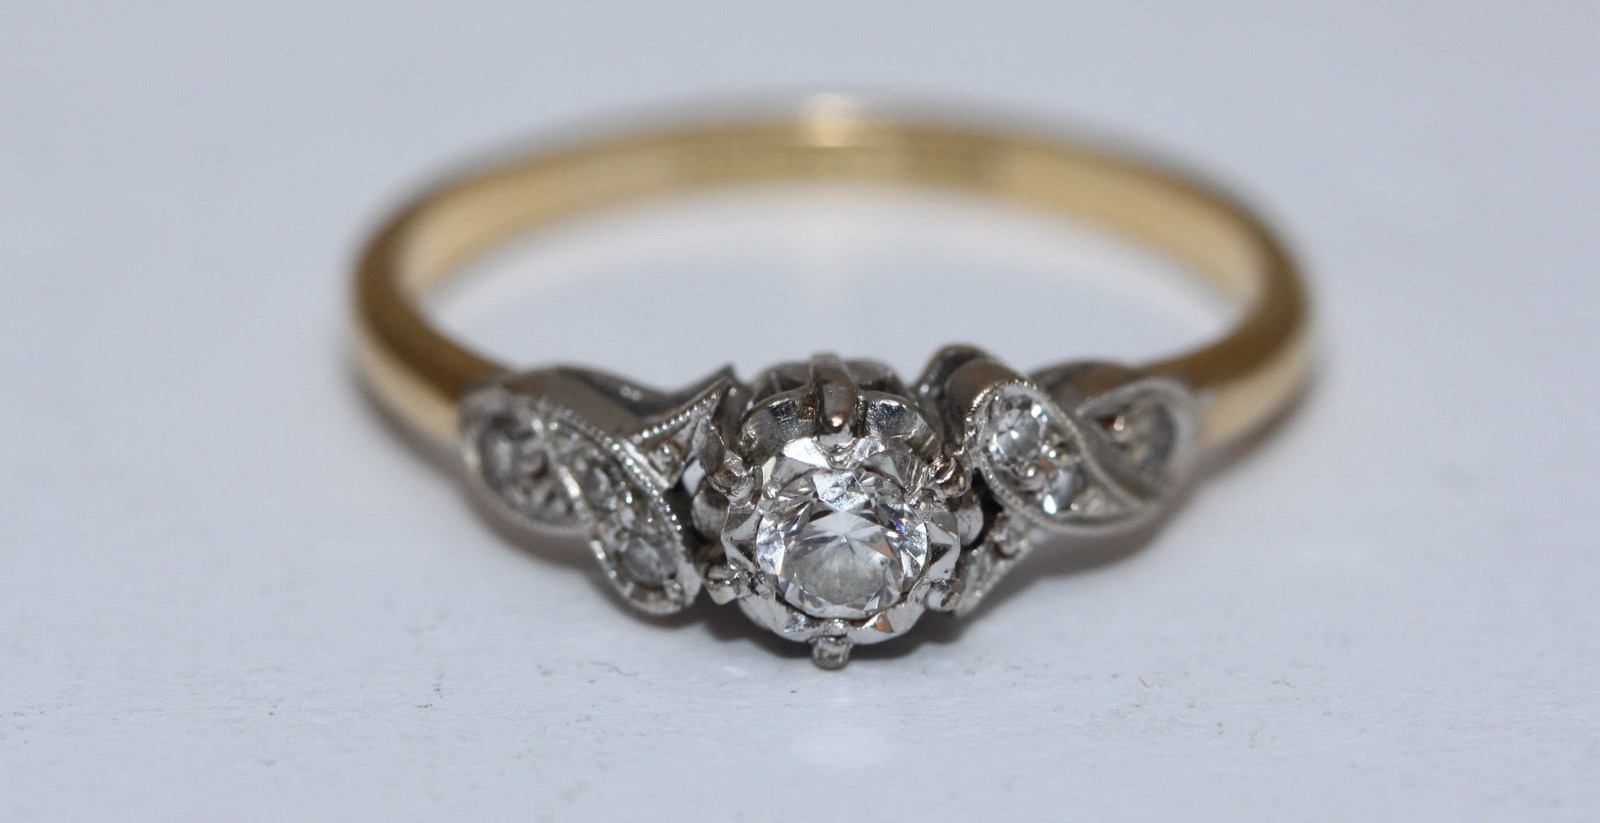 An 18ct gold and diamond ring, centrally set with a rbc diamond, measuring approximately 0.20cts,